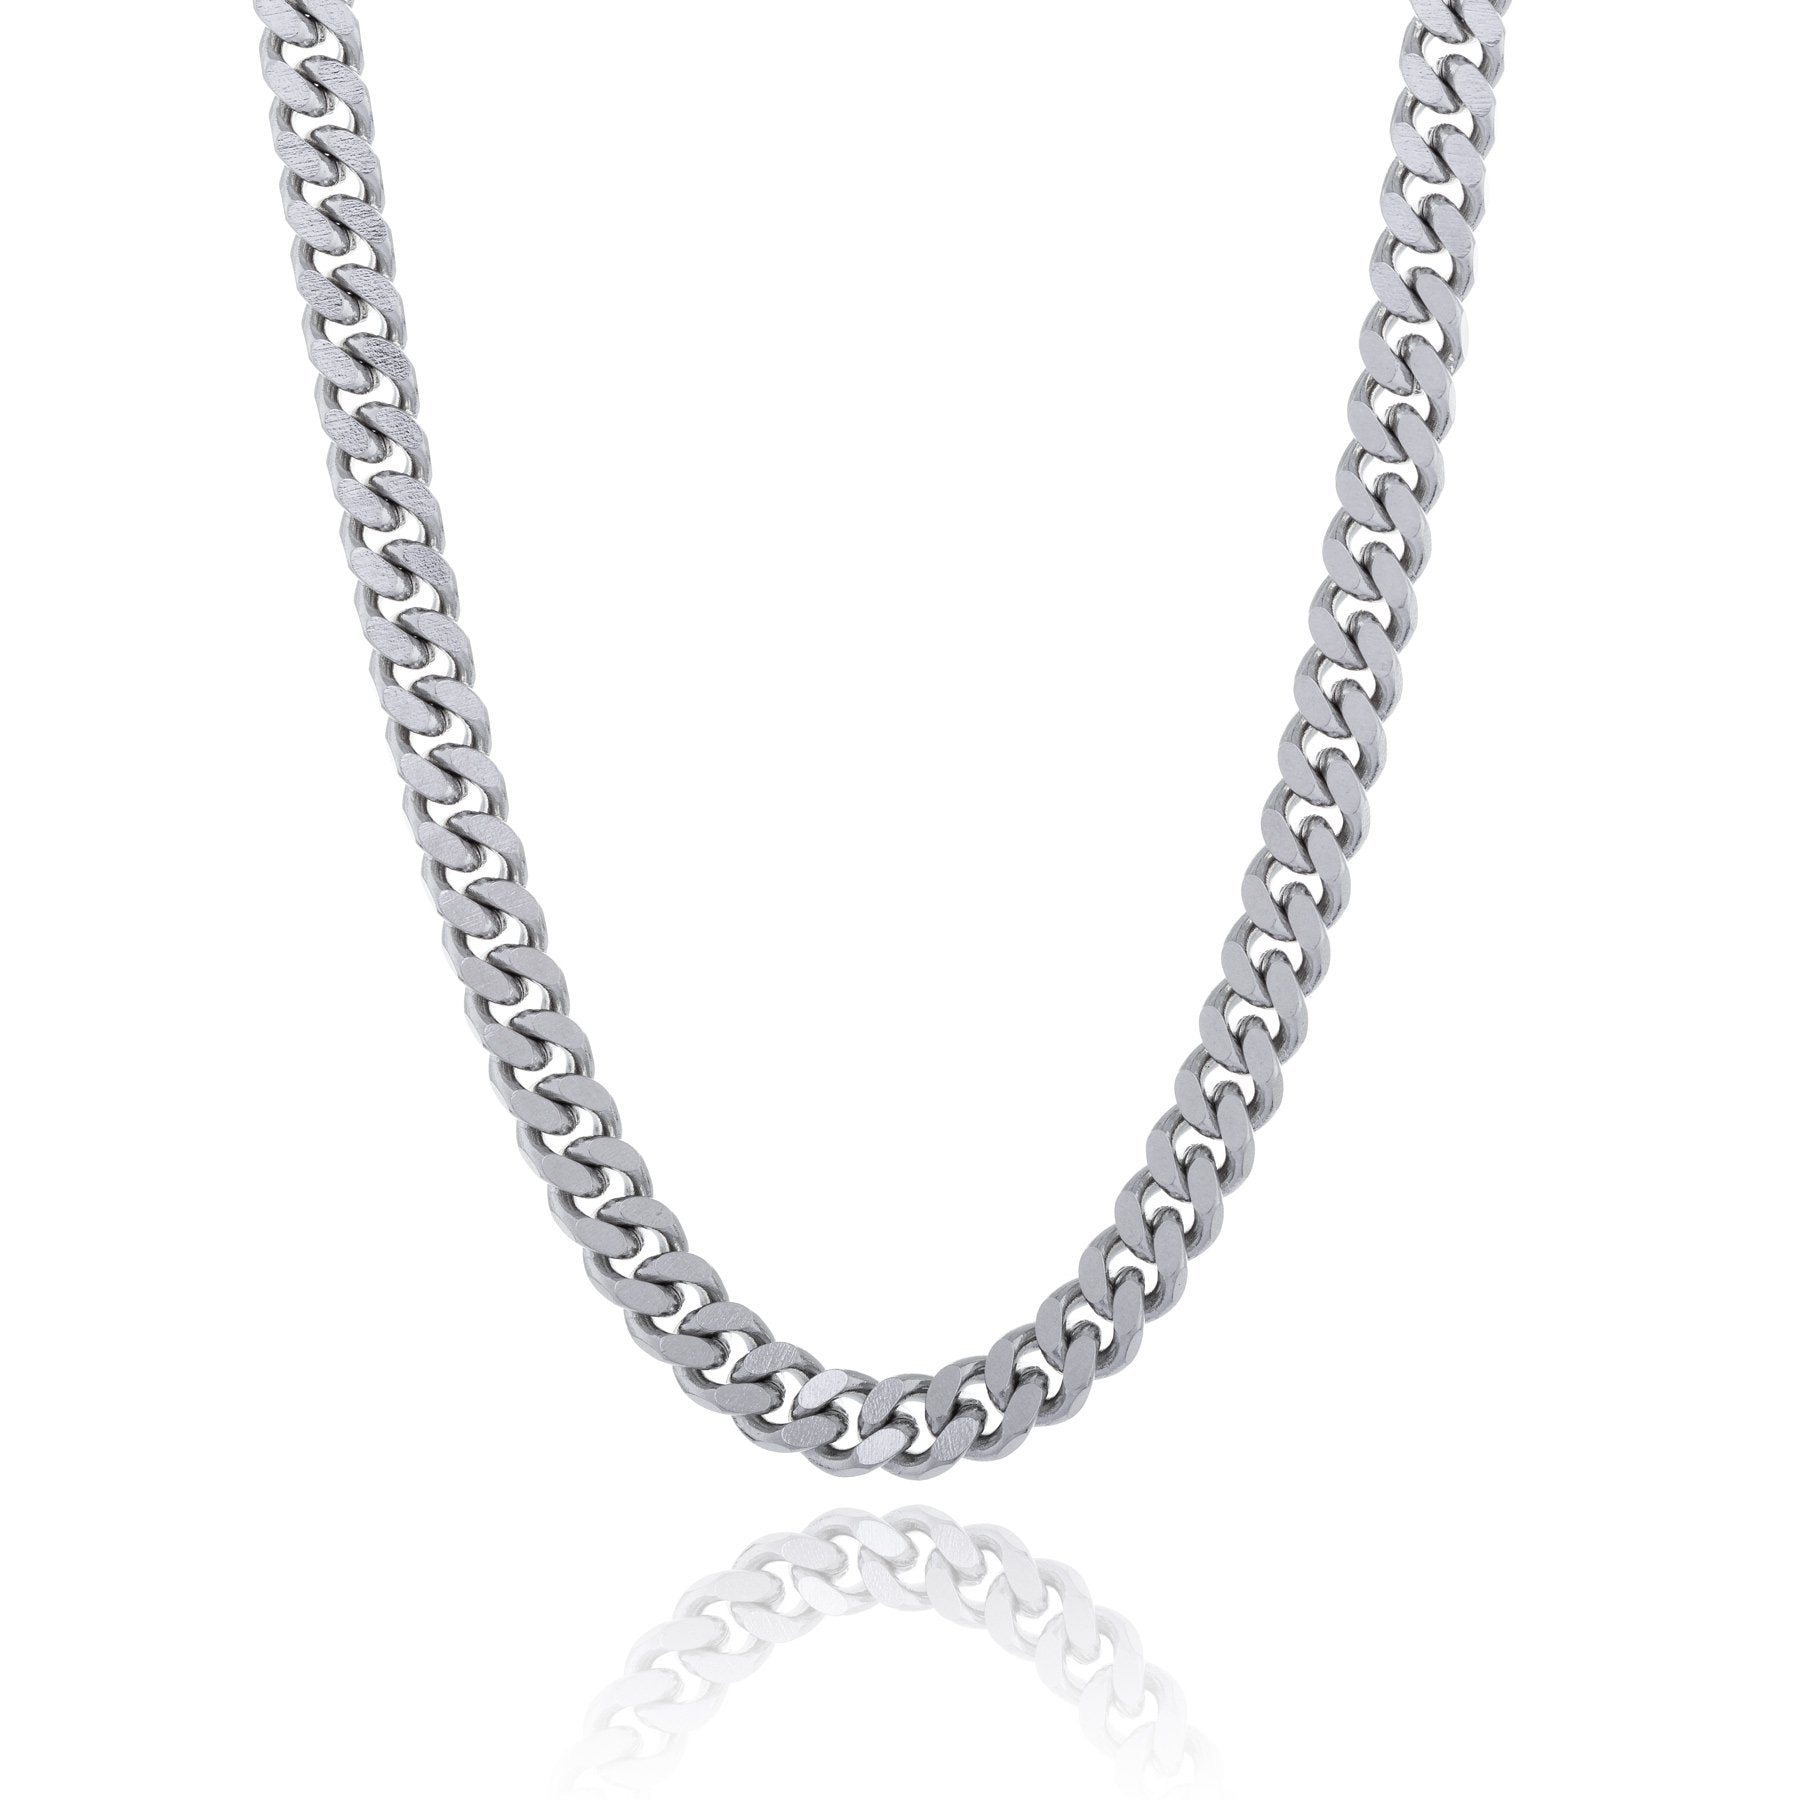 Cuban Link Necklace (6mm) PHYSICAL STATEMENT 